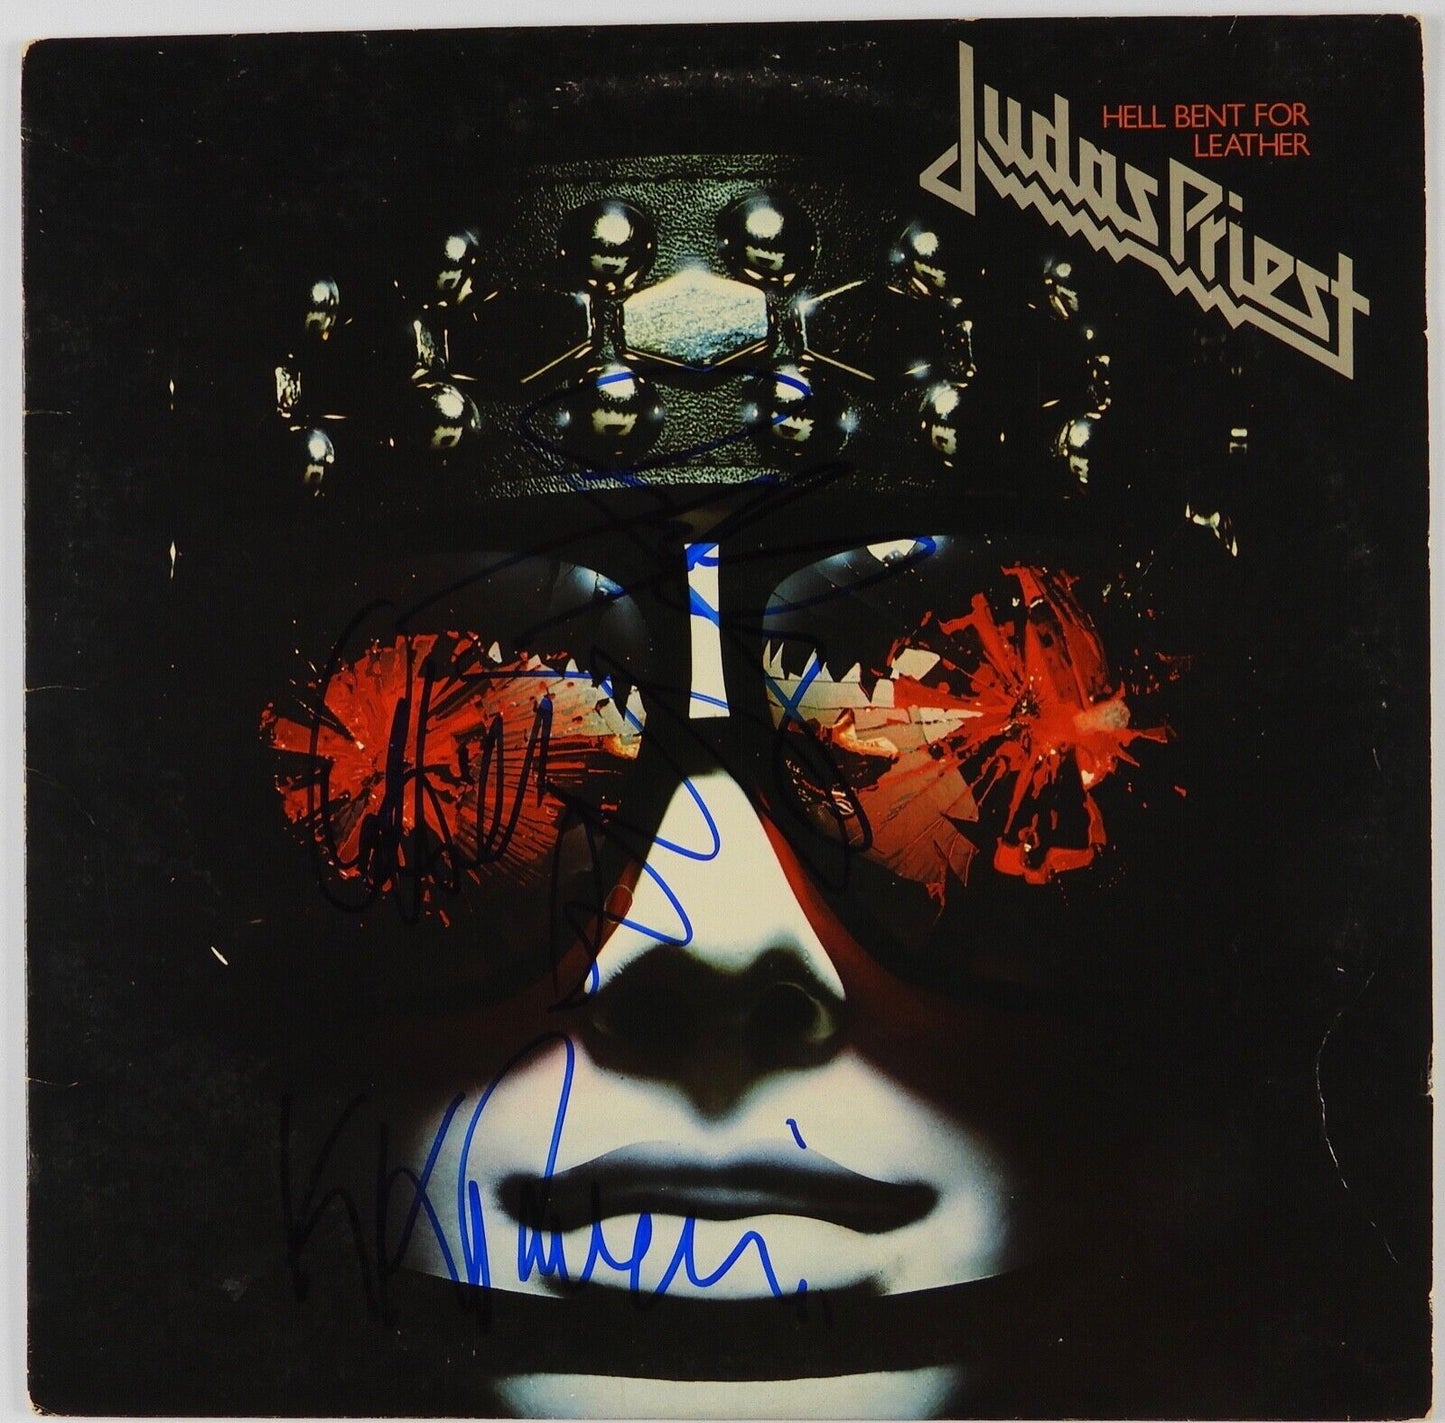 Judas Priest Band Signed Autograph Record Album JSA Vinyl Hell Bent For Leather